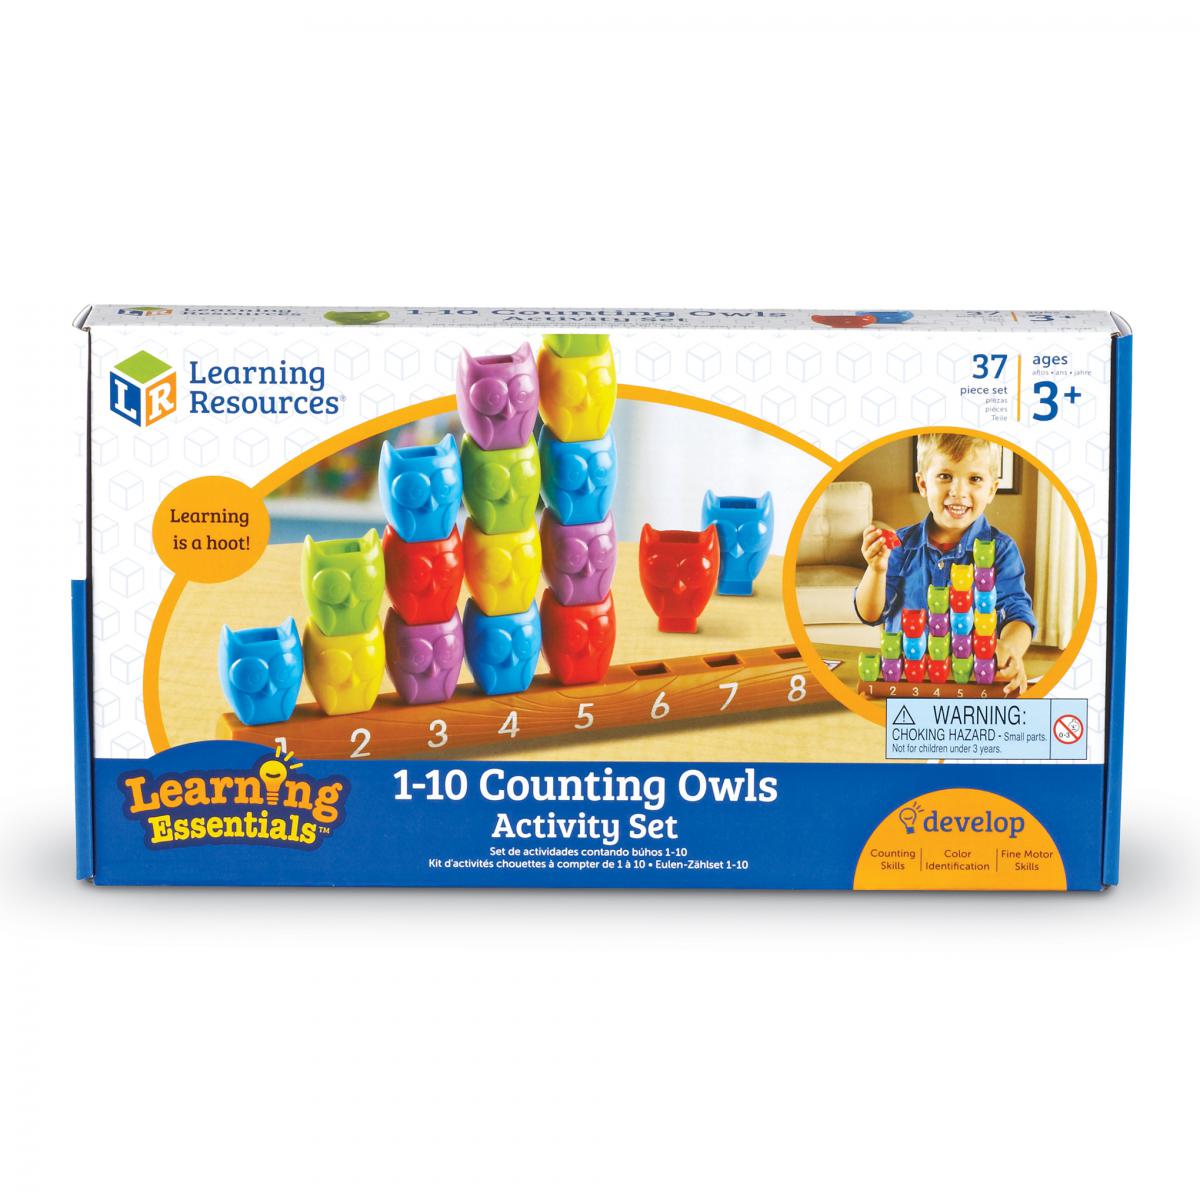  1-10 Counting Owls Activity Set 